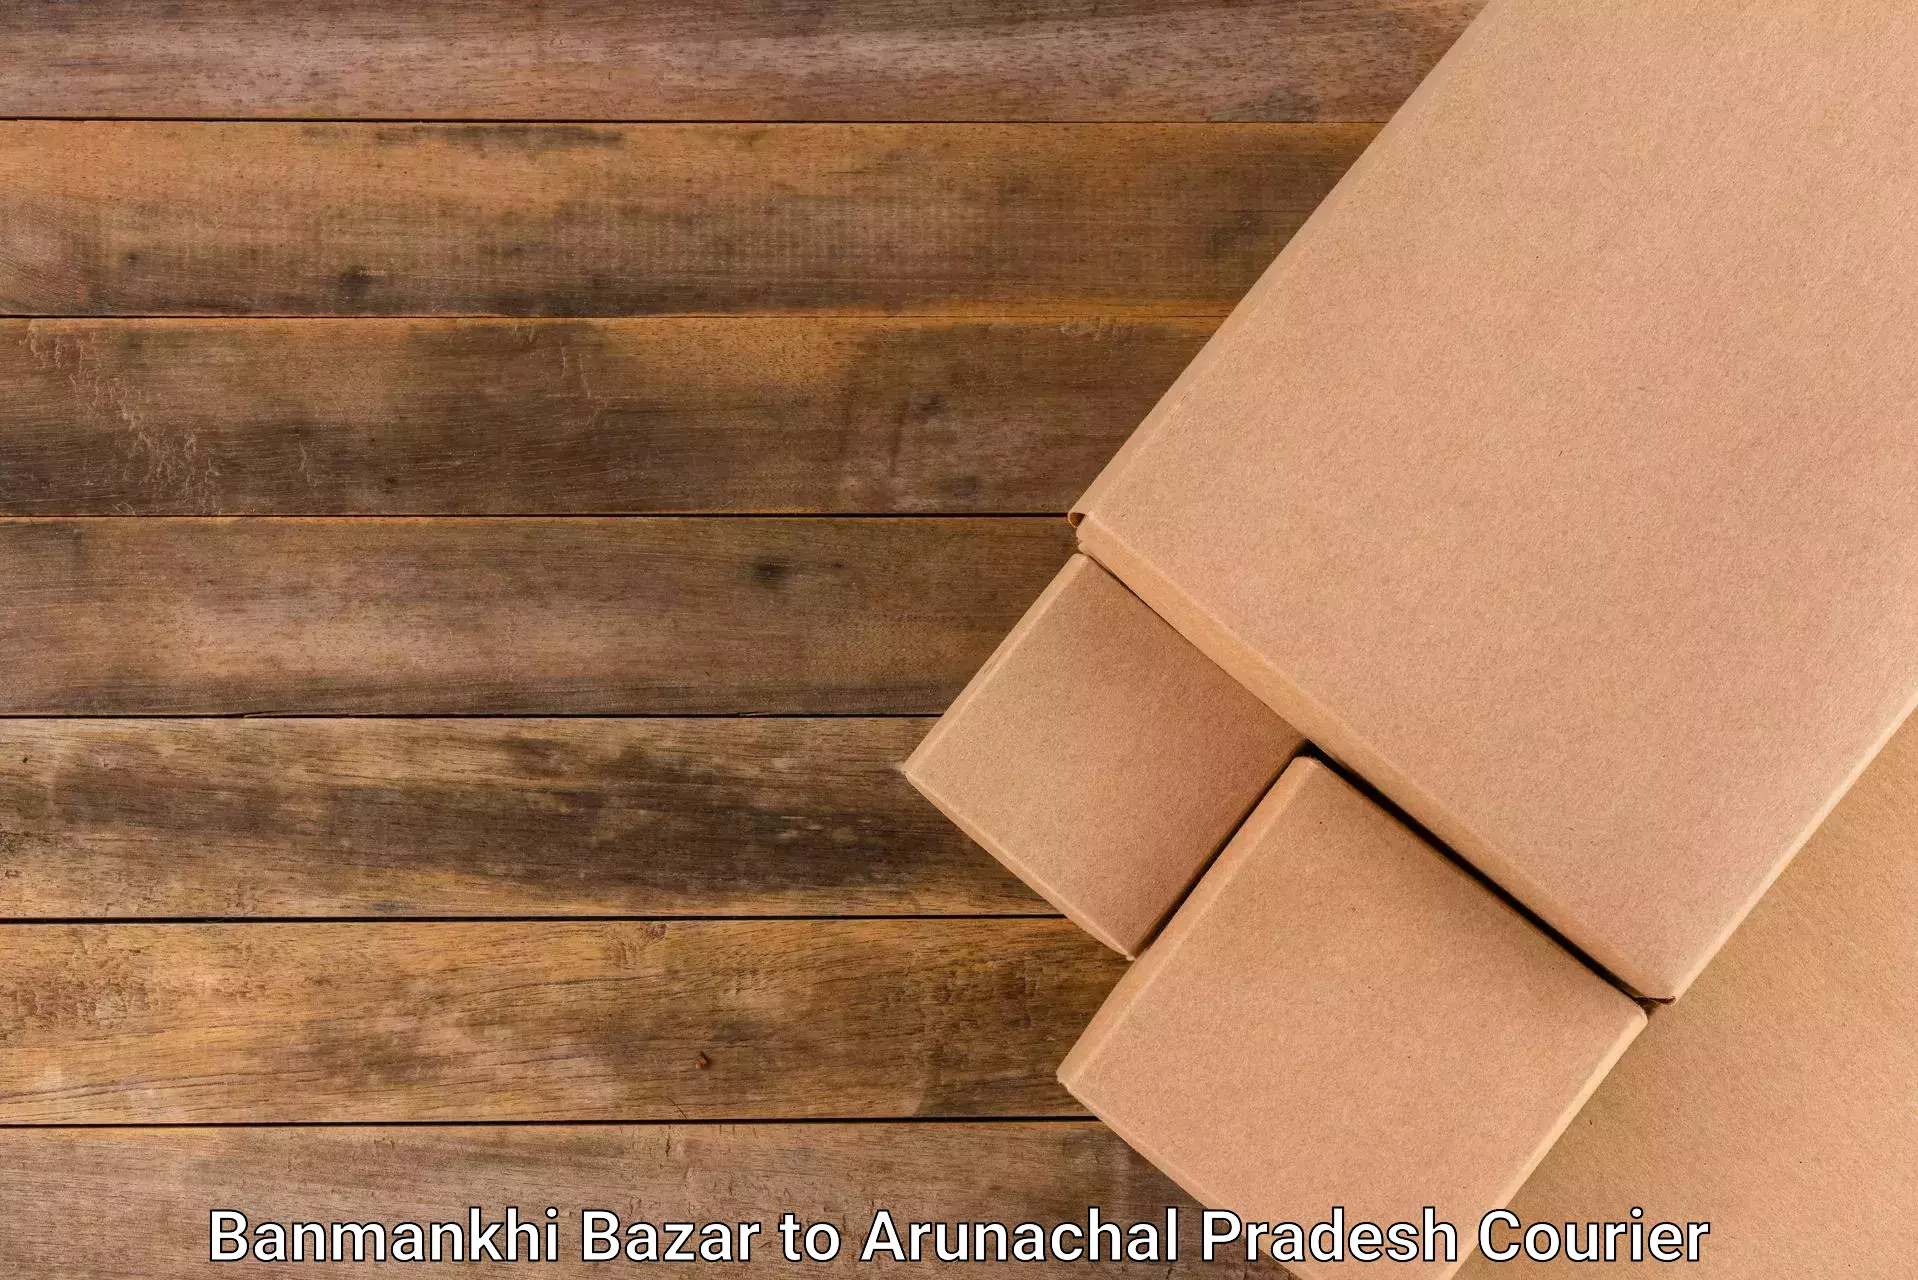 Professional courier services Banmankhi Bazar to Nirjuli